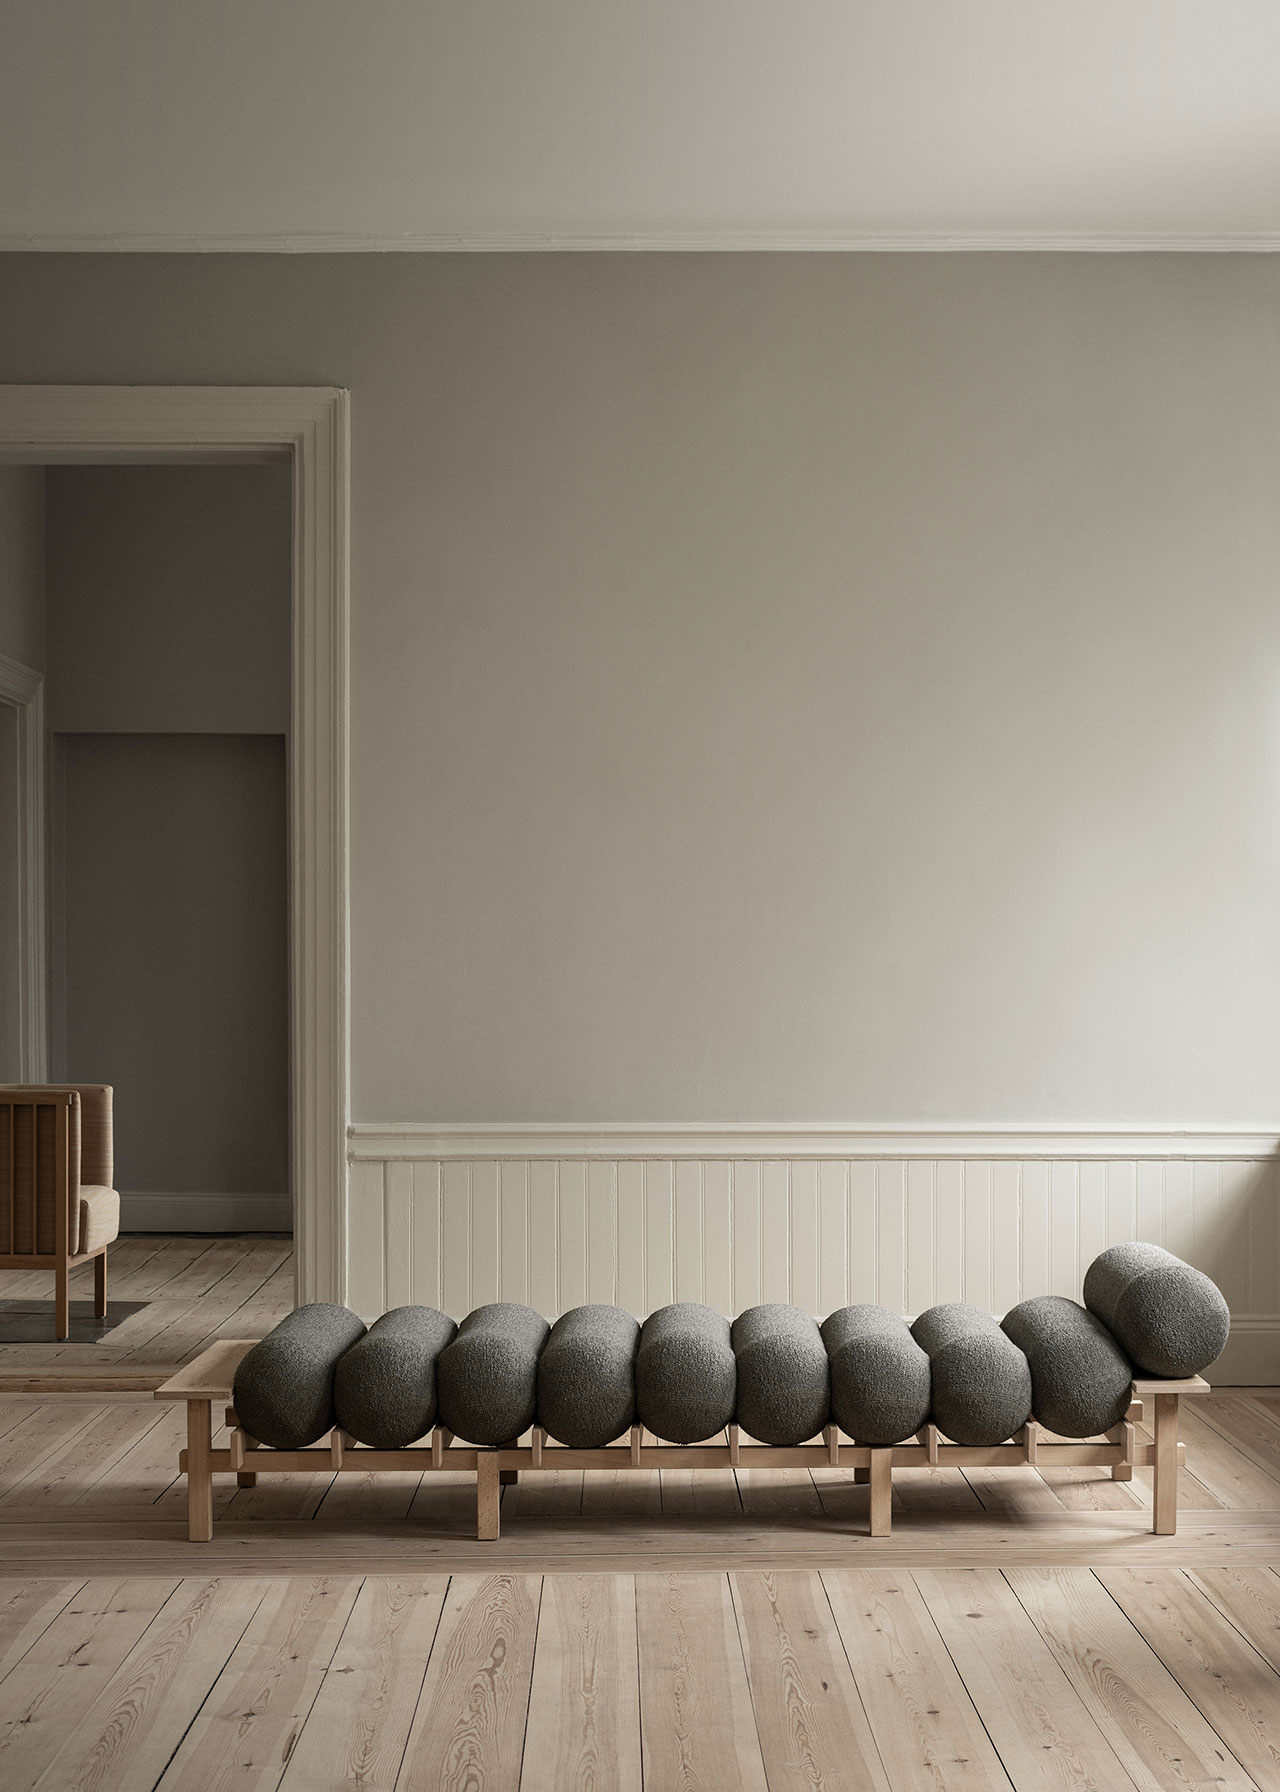 'Dag' daybed by Teresa Lundmark and Gustav Winsth for Gärsnäs.
Photography by Pia Ullin. Courtesy of Gärsnäs.